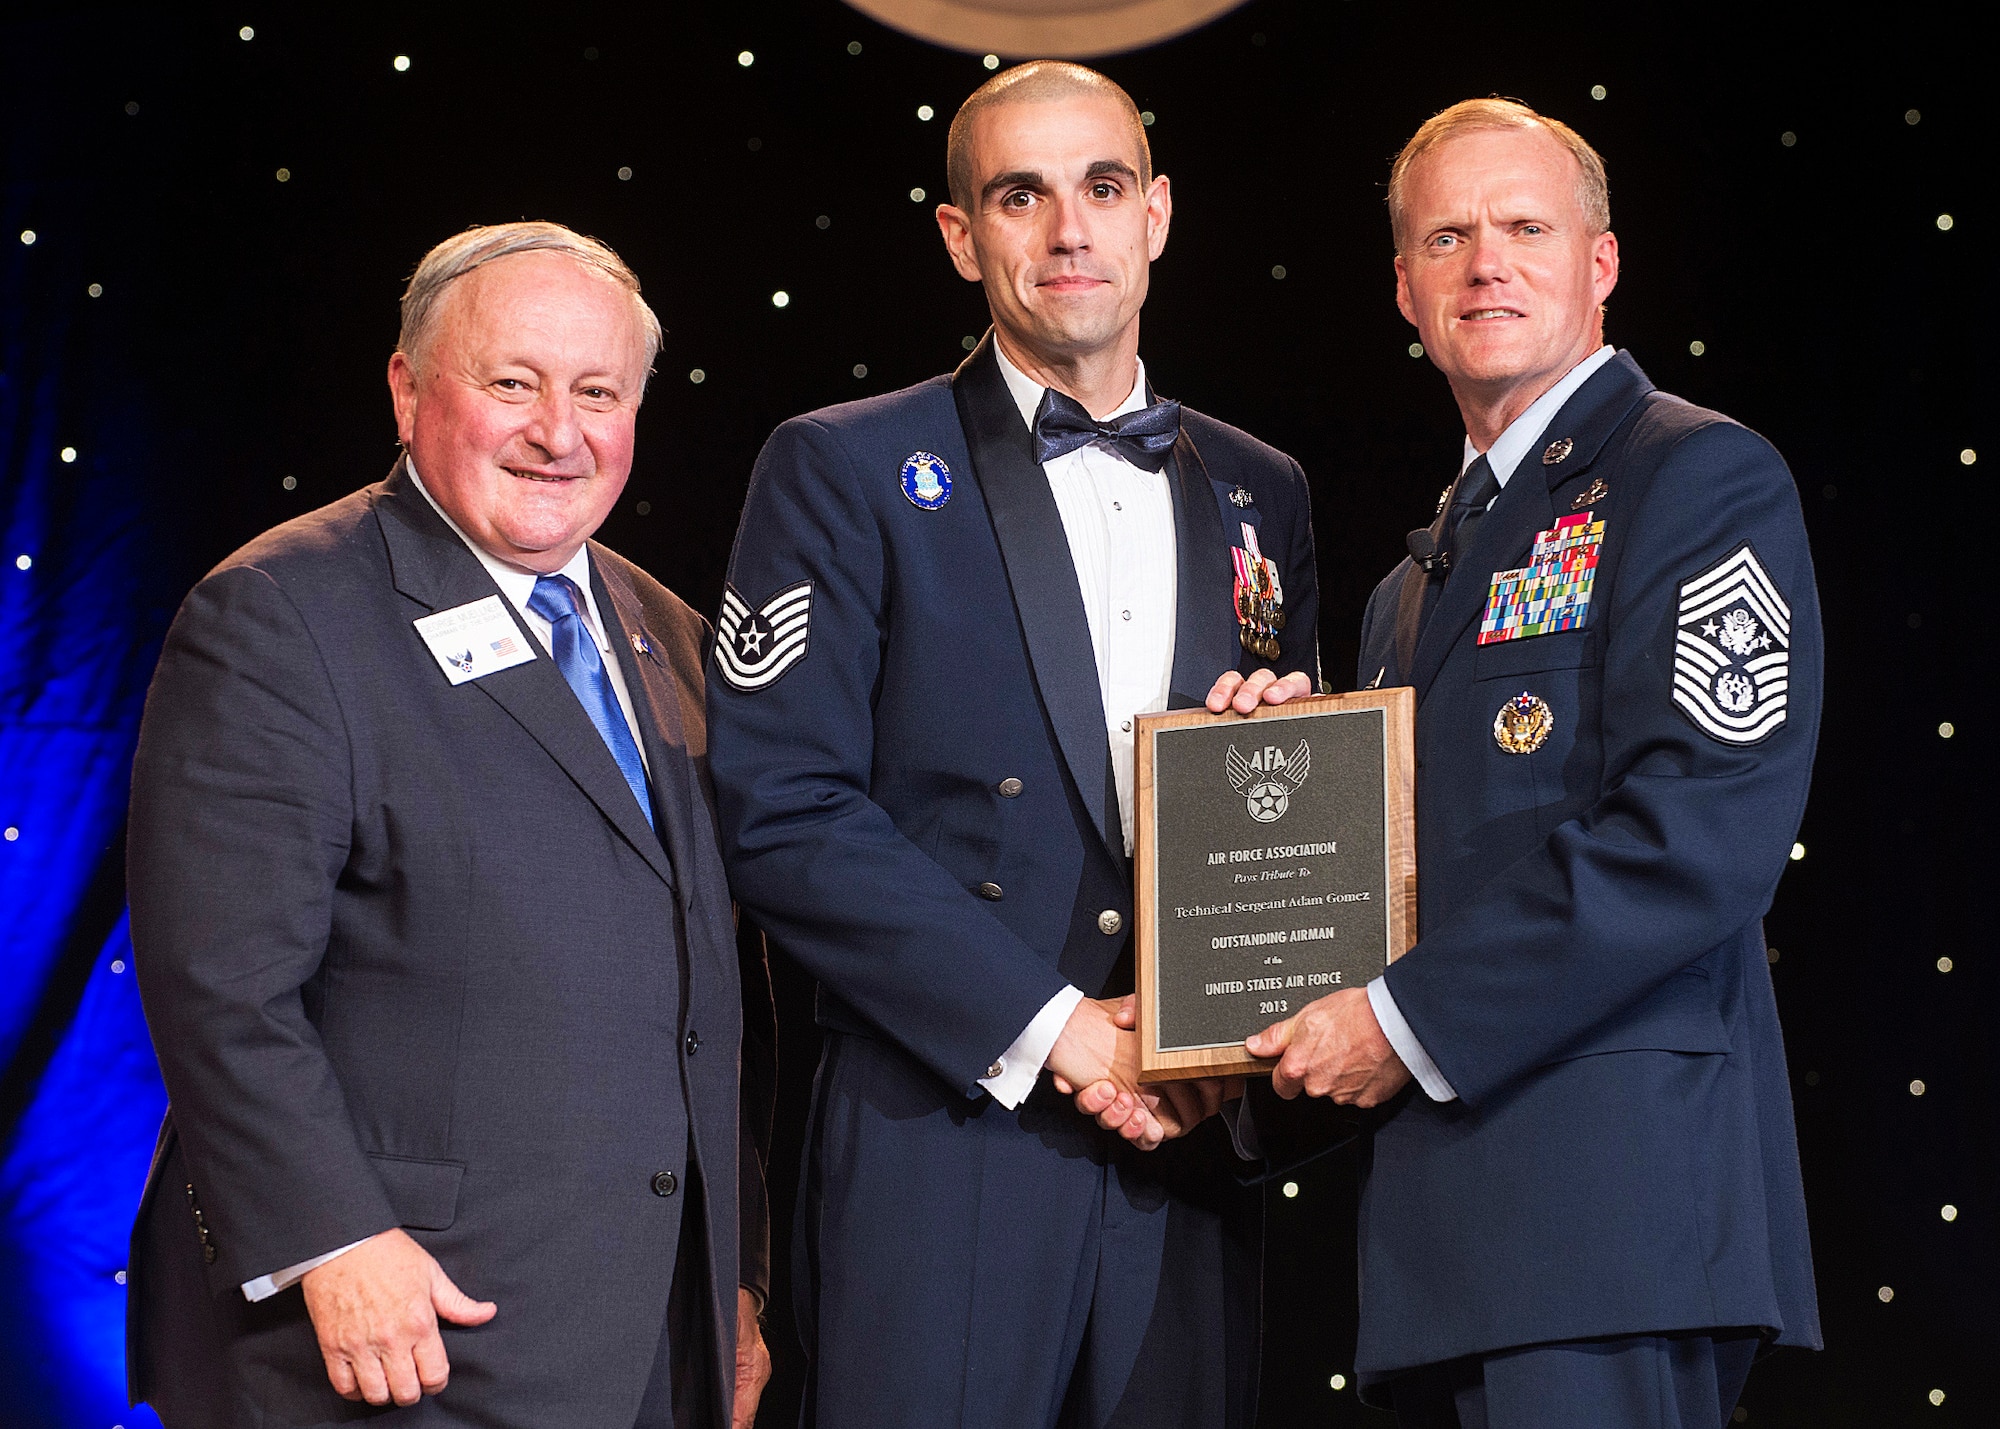 Tech. Sgt. Adam Gomez was recognized as one of the 12 Outstanding Airmen of the Year at a reception and awards dinner hosted by the Air Force Association during the AFA's annual Air & Space Conference and Technology Exposition Sept. 16, 2013, in Washington, D.C. The OAY award recognizes the top 12 outstanding enlisted Airmen for superior leadership, job performance, community involvement and personal achievements. Gomez is a cyber transport craftsman with the 3rd Combat Camera Squadron at Joint Base San Antonio-Lackland Air Force, Texas. (U.S. Air Force photo/Jim Varhegyi)